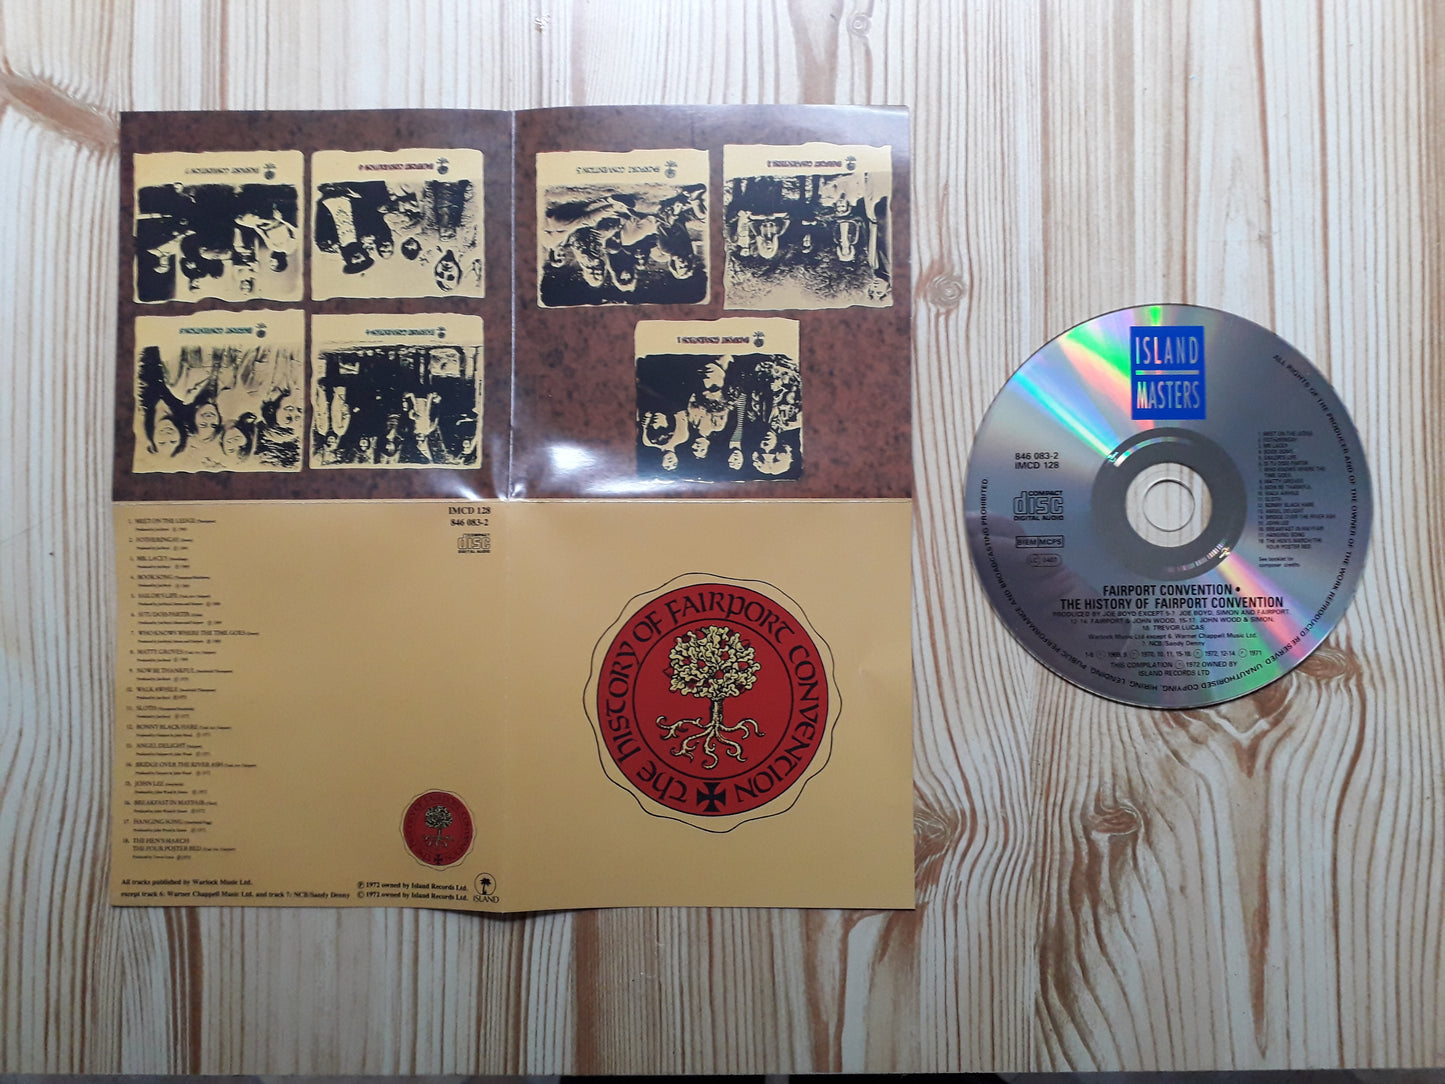 Fairport Convention-The History Of Fairport Convention CD IMCD 128)